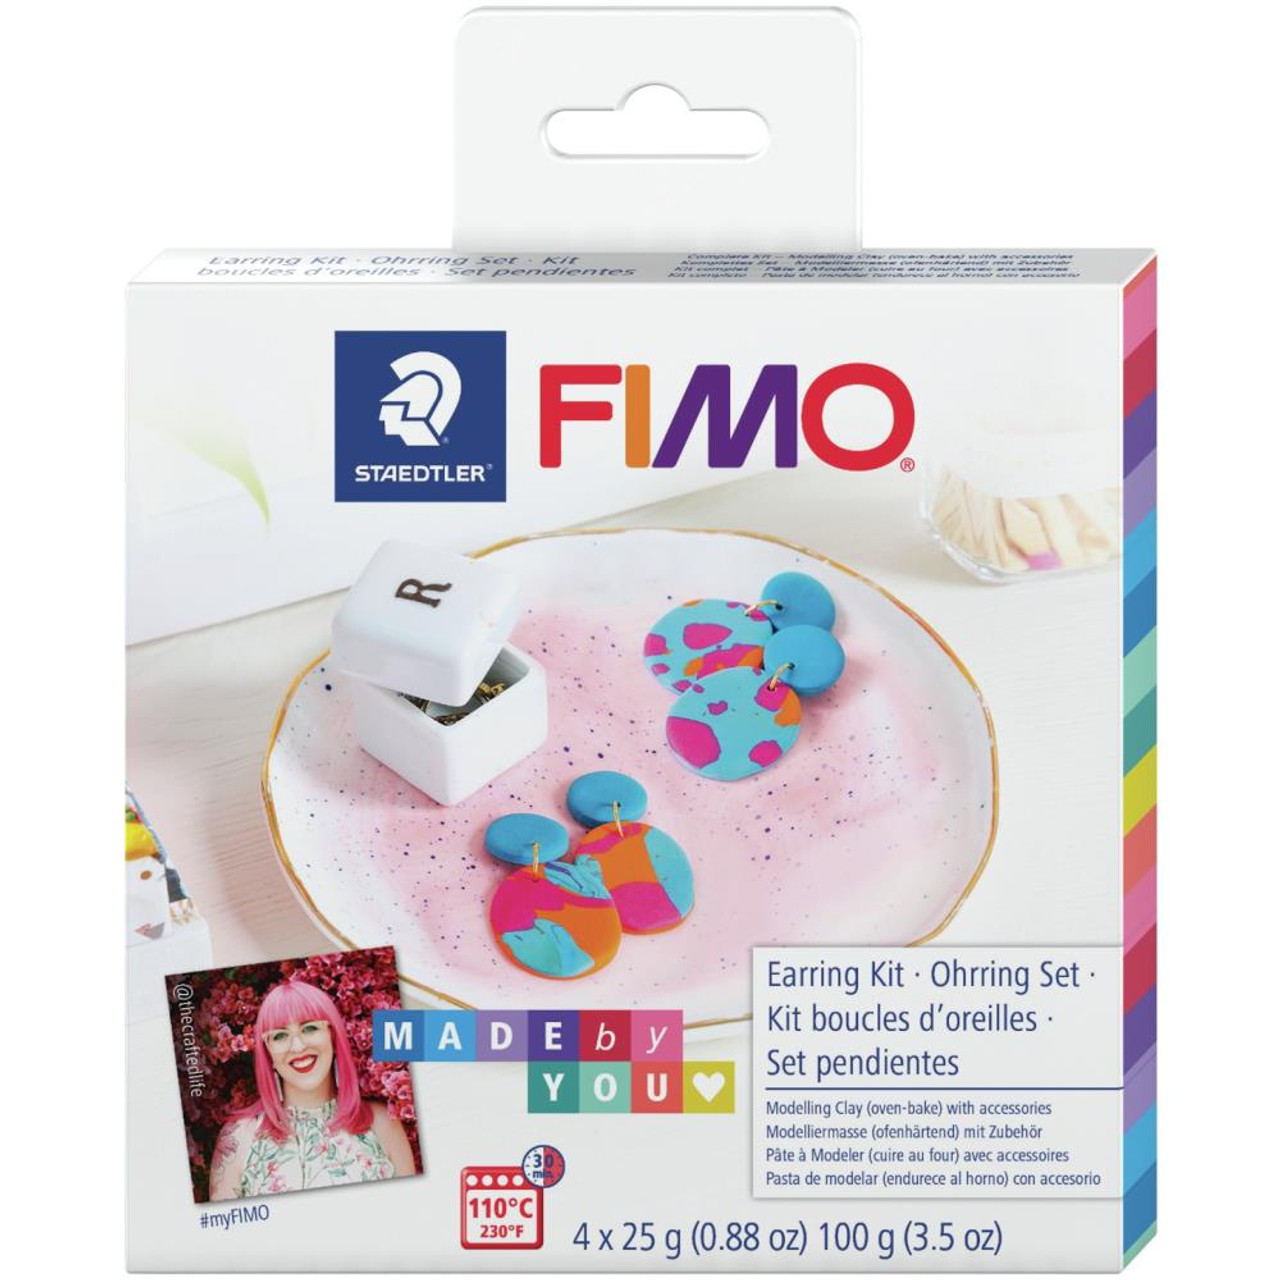 Fimo Made By You Kit - Earring Kit - Poly Clay Play